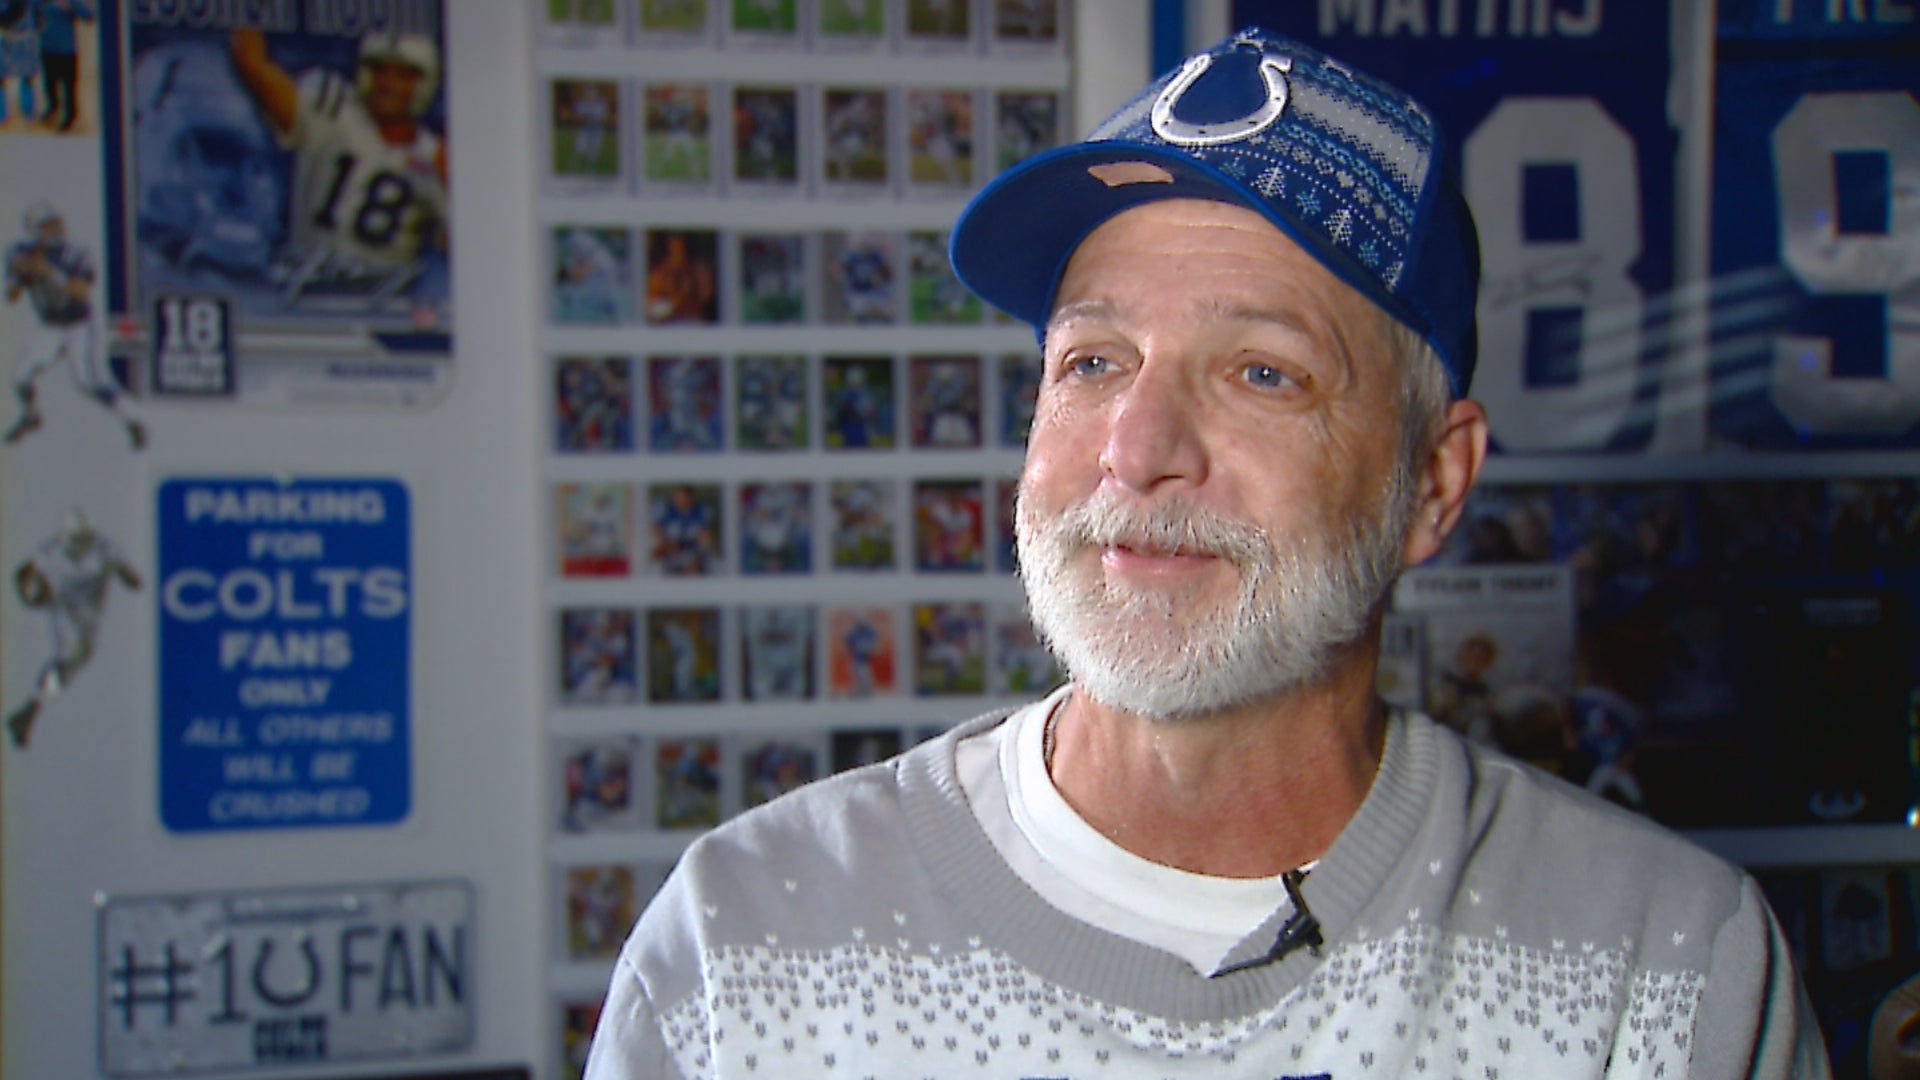 Colts fans are ready for Monday Night Football on WISH-TV